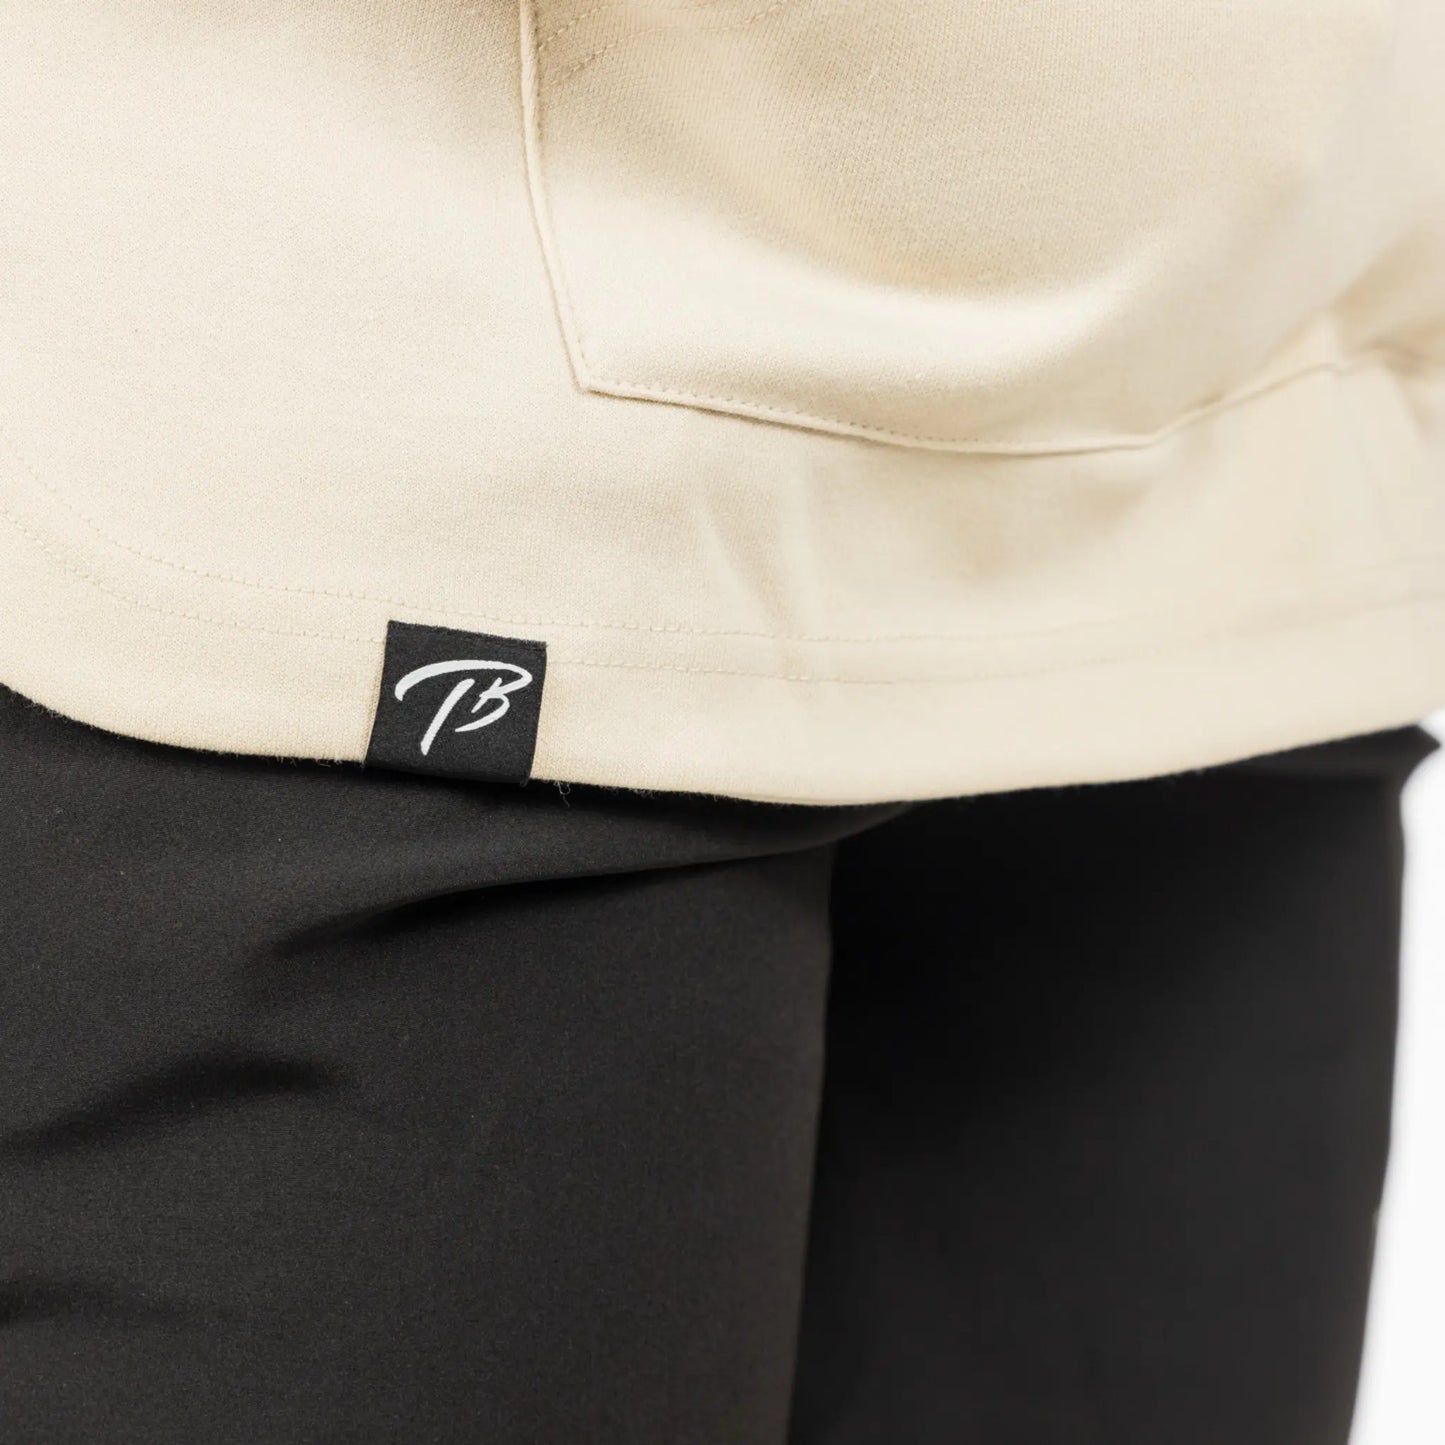 The image features a close-up view of a cream-colored hoodie with a small, square black logo label that has a white "TB" inscription, representing the brand identity. The hoodie fabric appears to be of a thick, durable quality suitable for athletic wear.